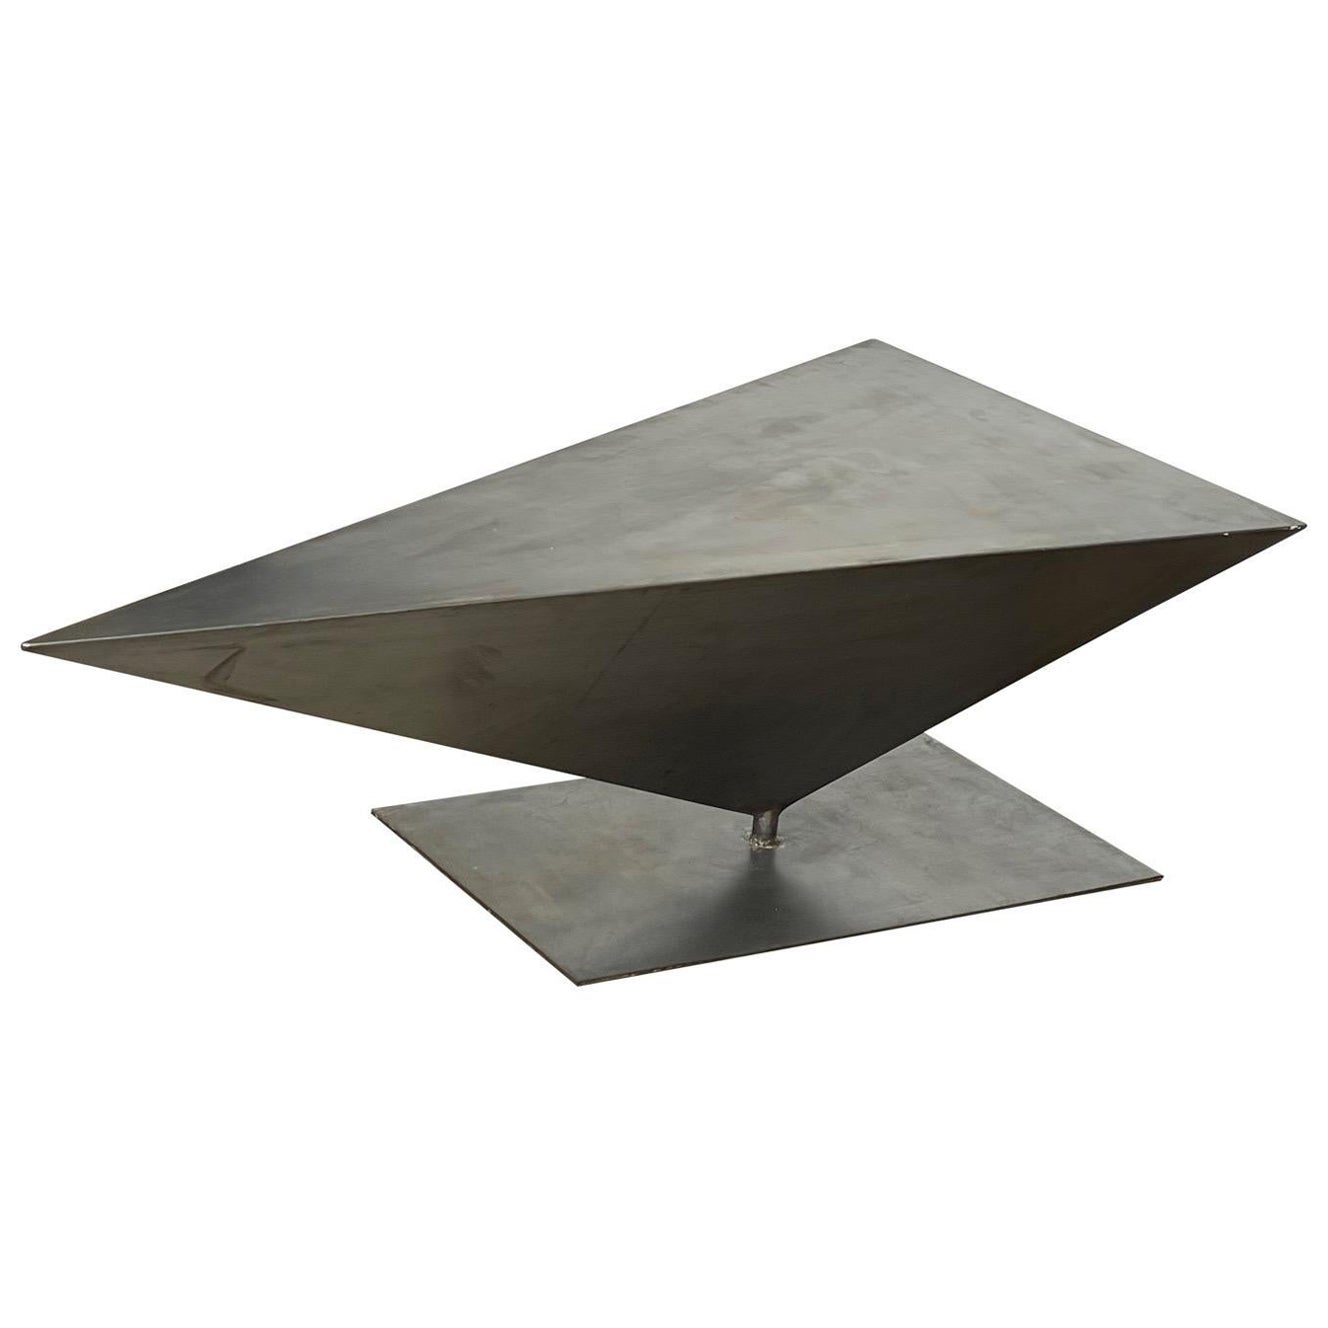 1980s Angular Steel Sculptured Coffee Table For Sale